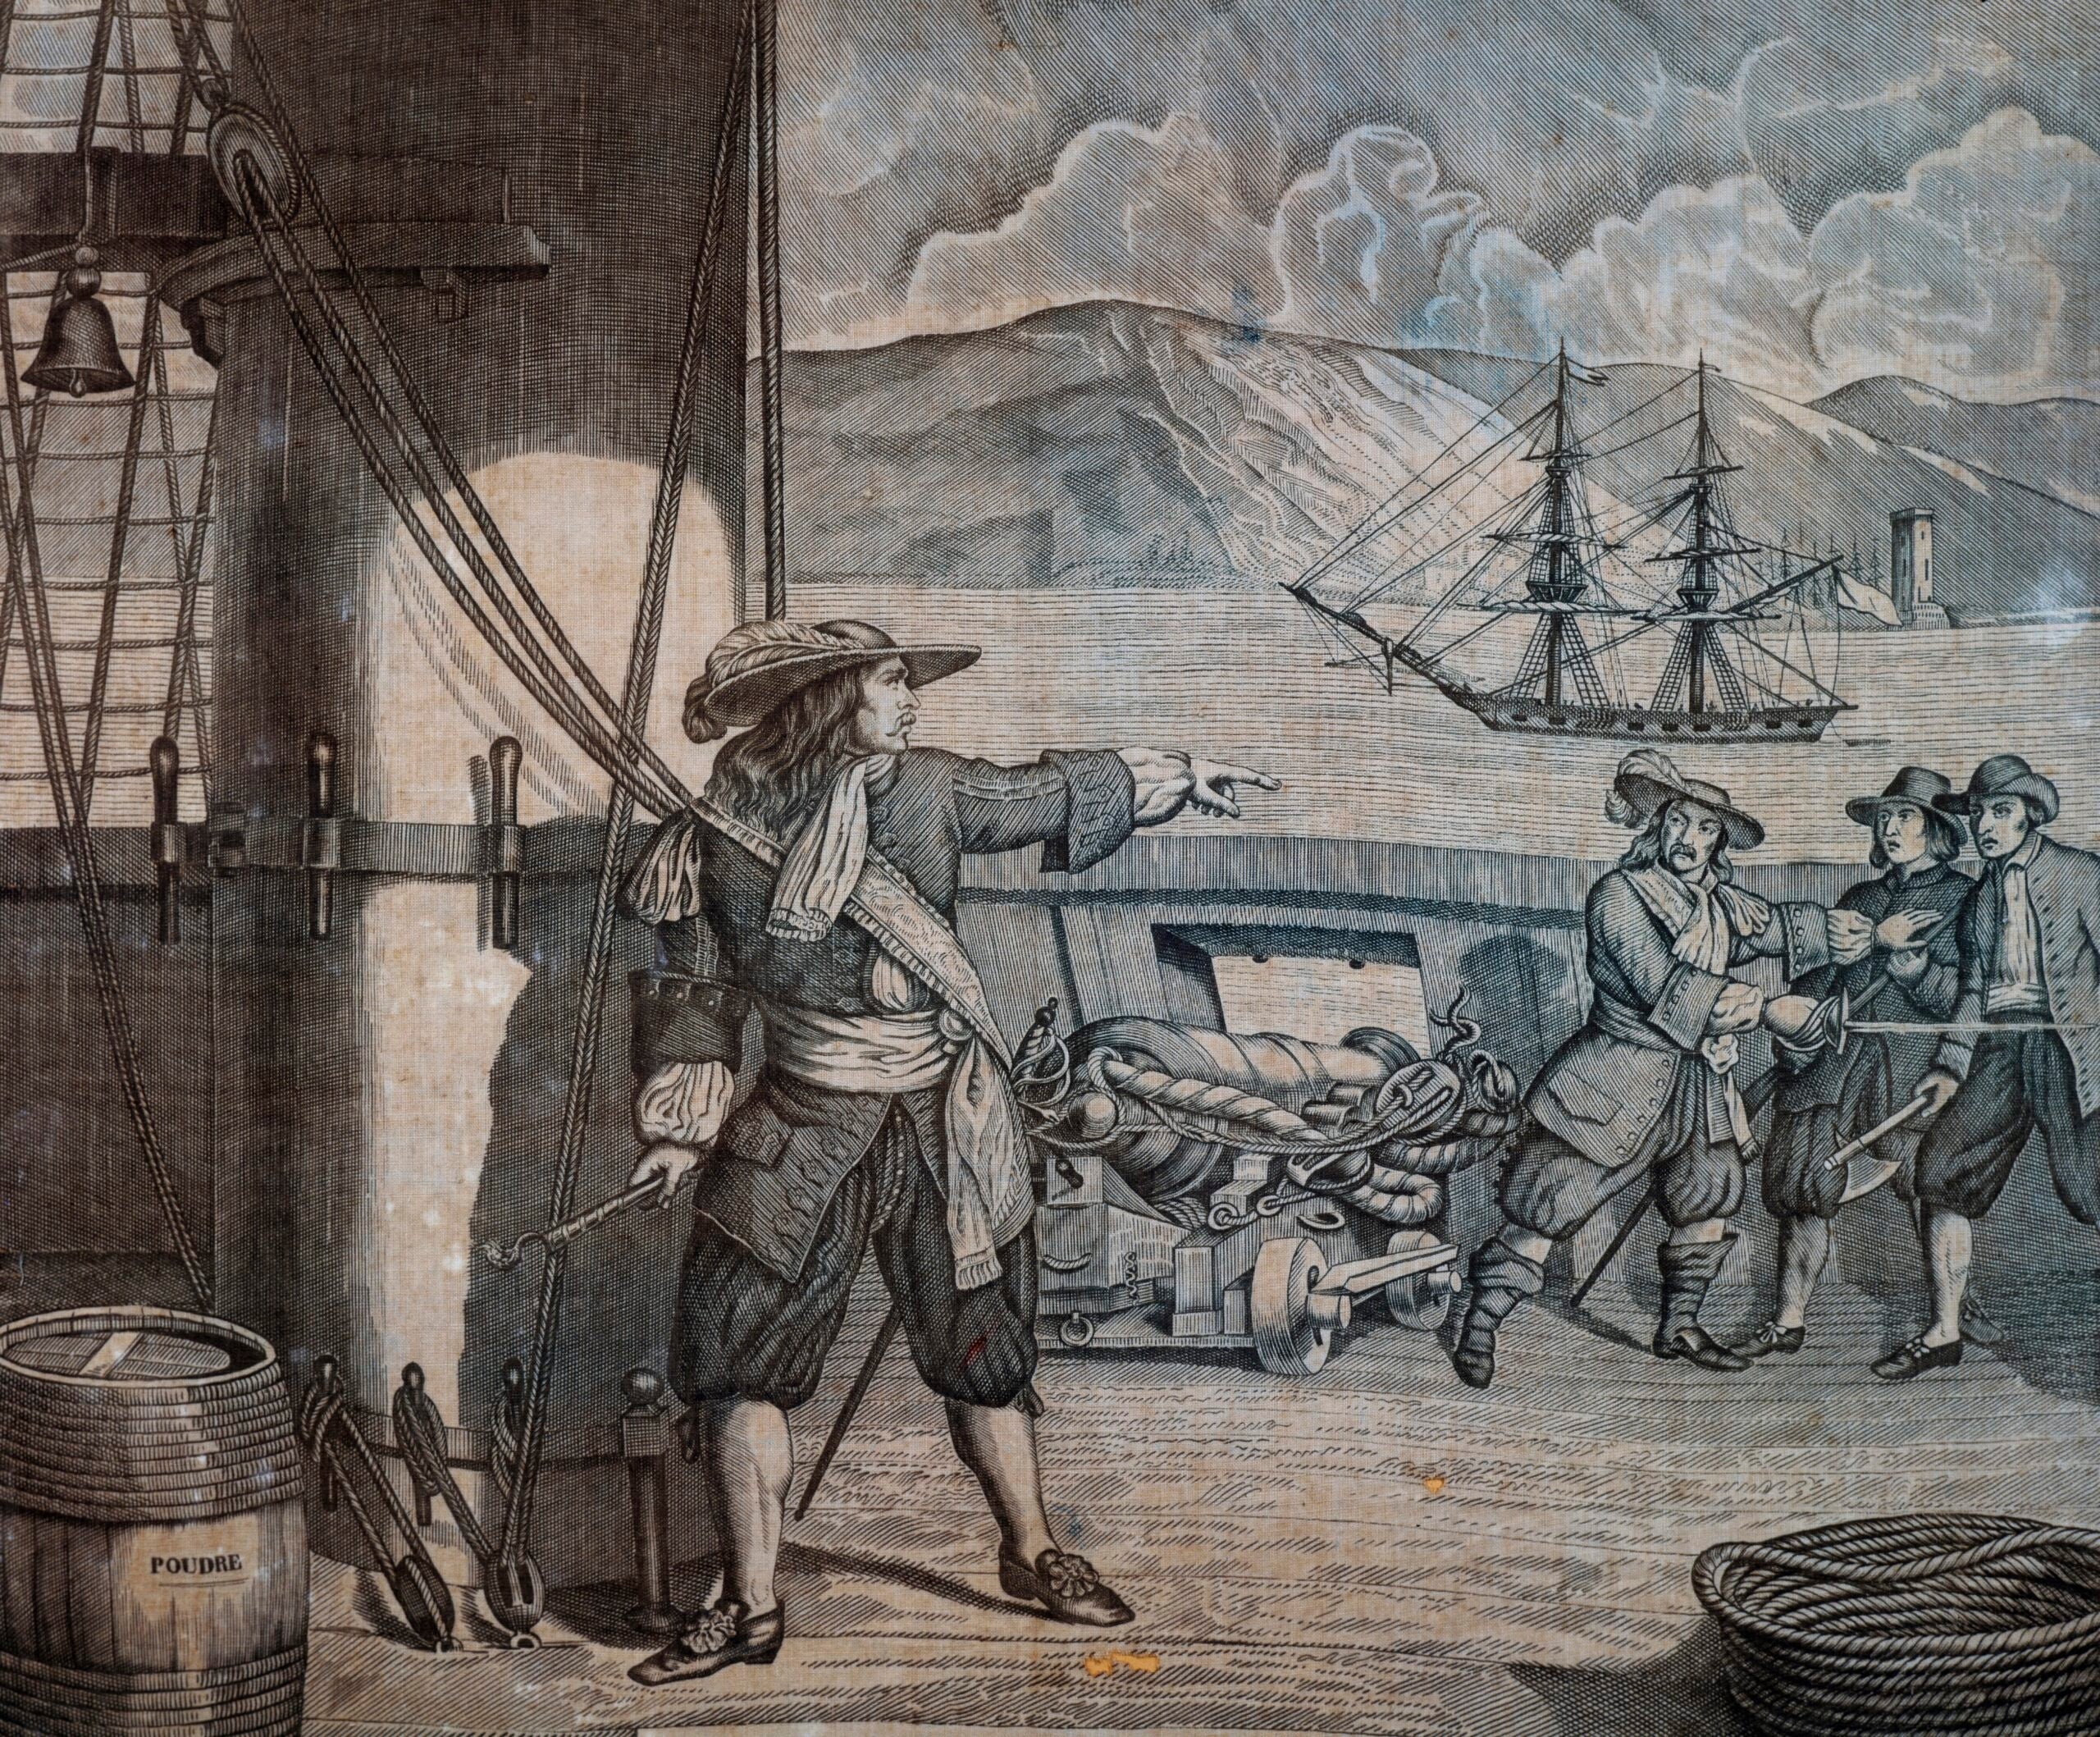 FRANCE - MAY 25: Pirate captain Jean Bart (1650-1702) on board a British ship, engraving on fabric by Bouquet, France, 17th century. Paris, Musée National Des Arts Africains Et Oceaniens (Art Museum) (Photo by DeAgostini/Getty Images)